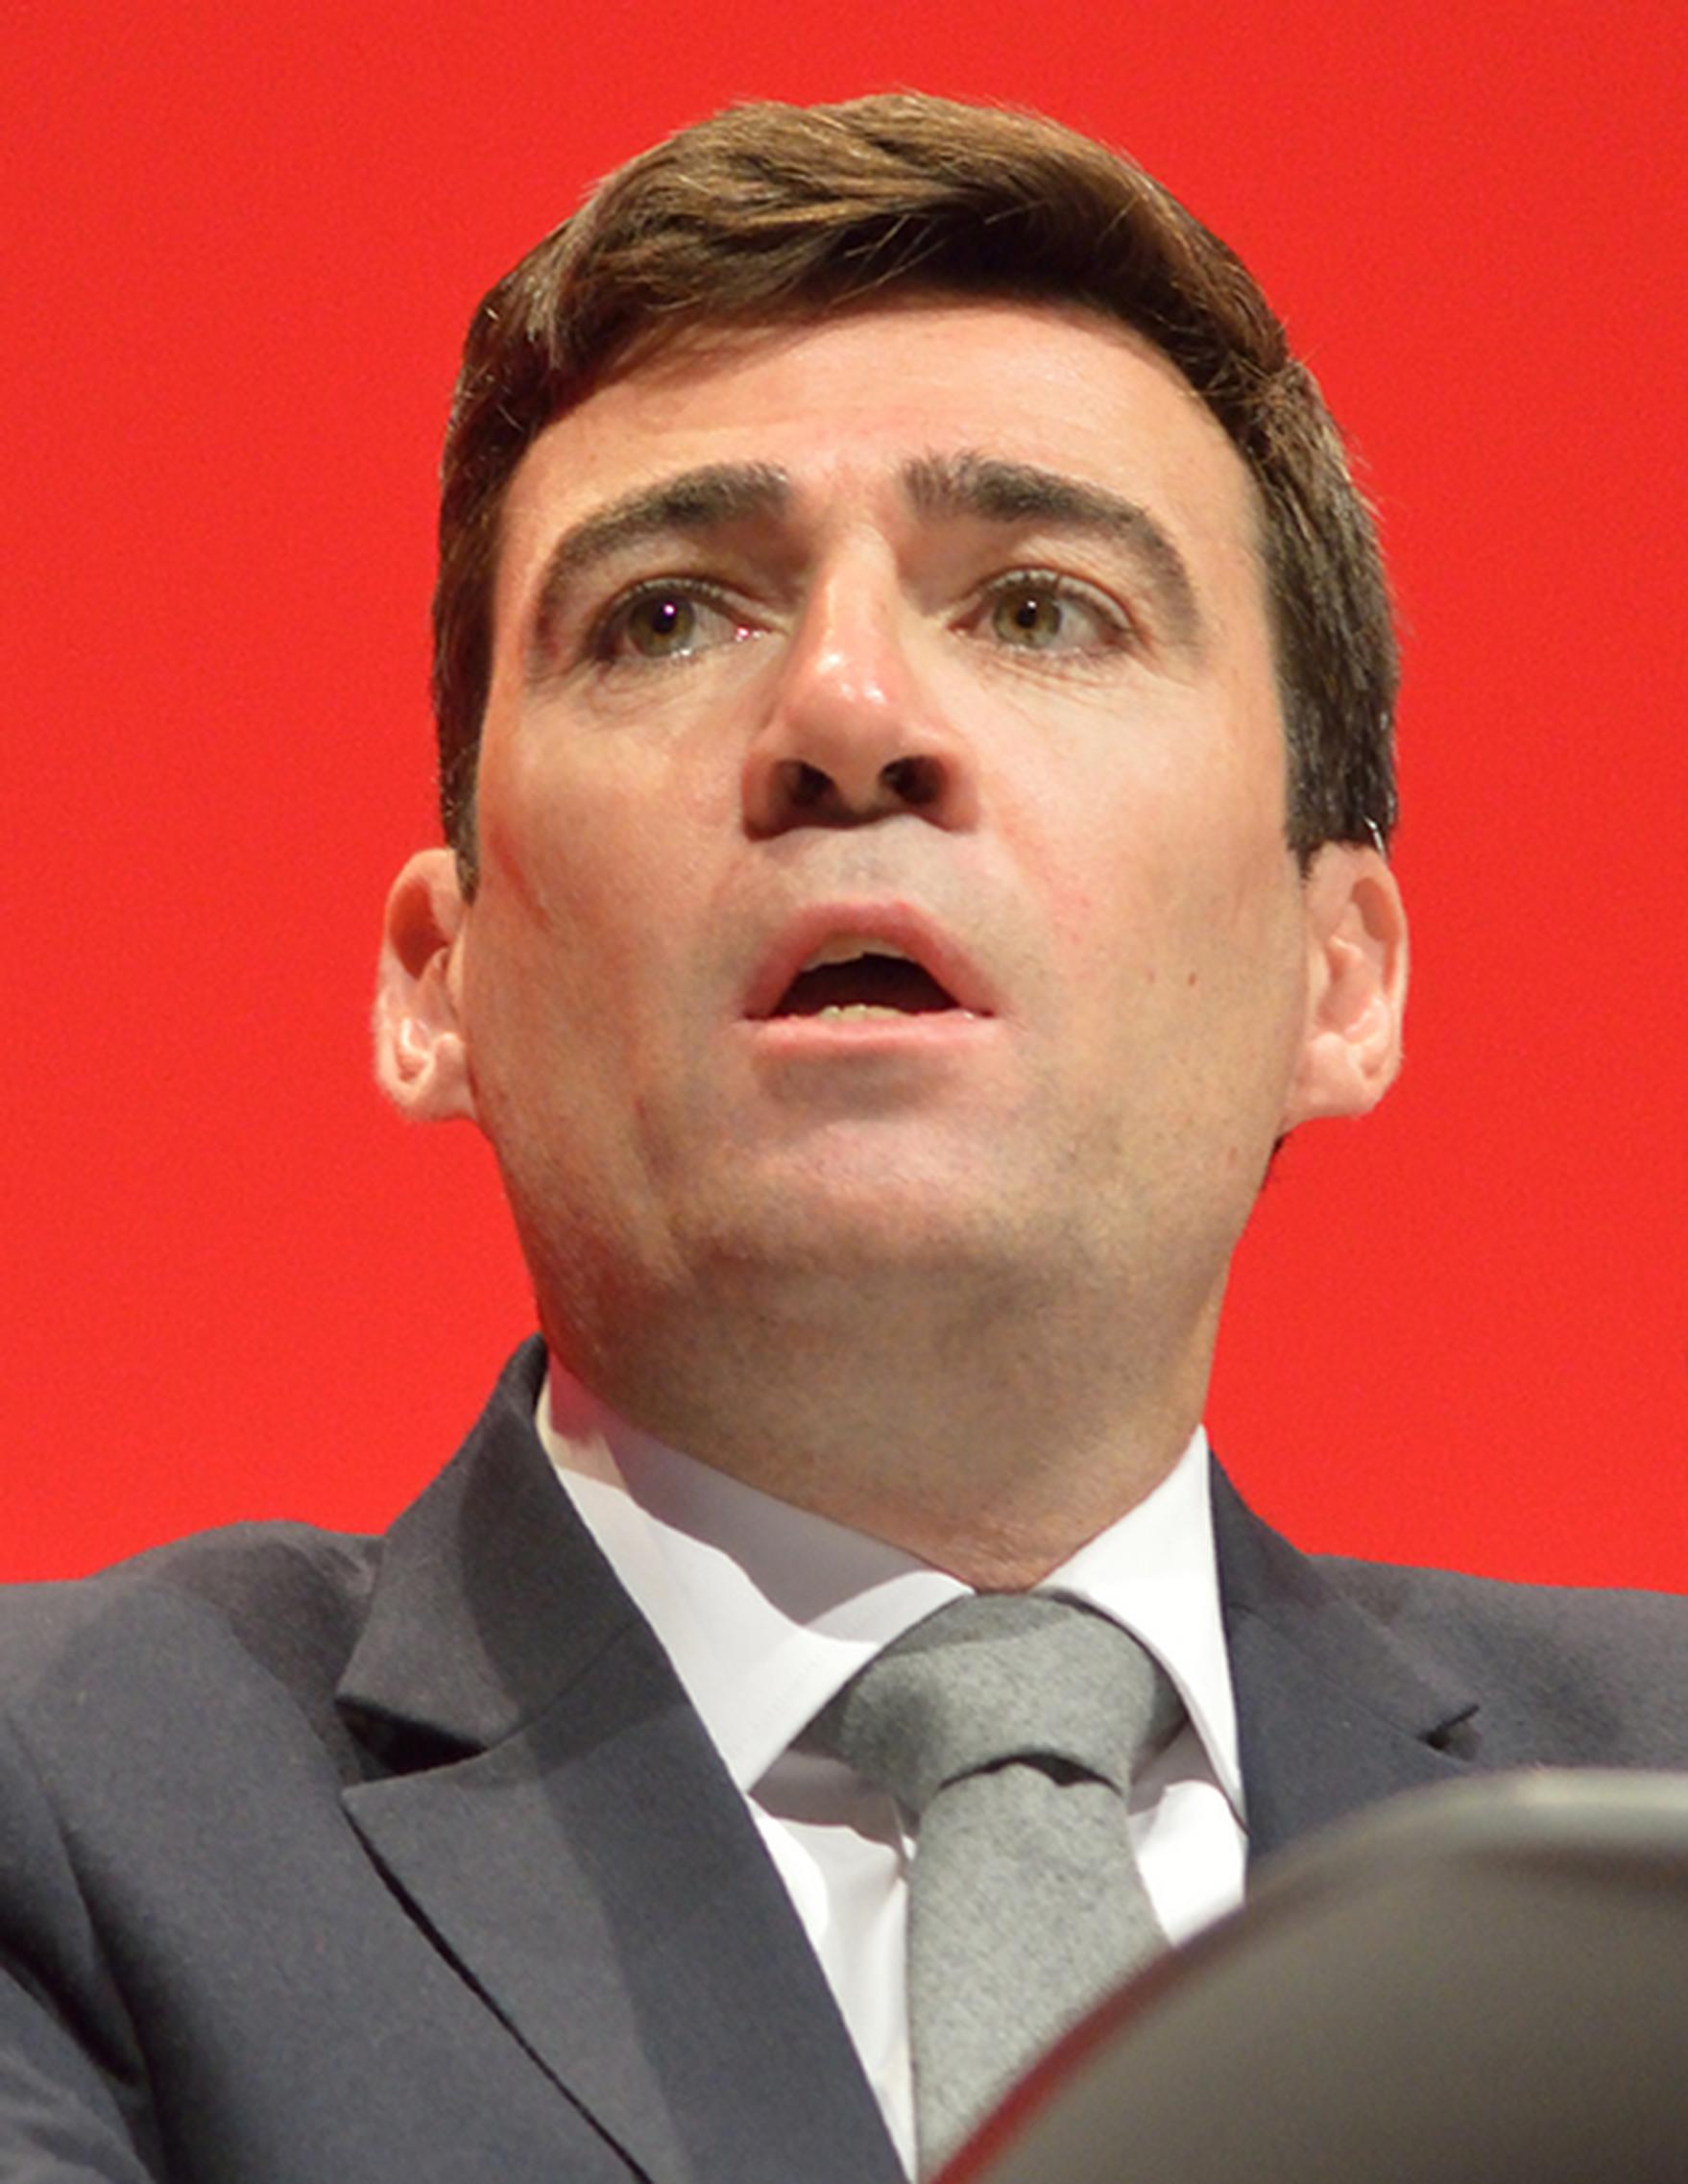 Andy Burnham: We again have confusion and uncertainty and what we need is a coherent plan for the railways in Manchester city centre